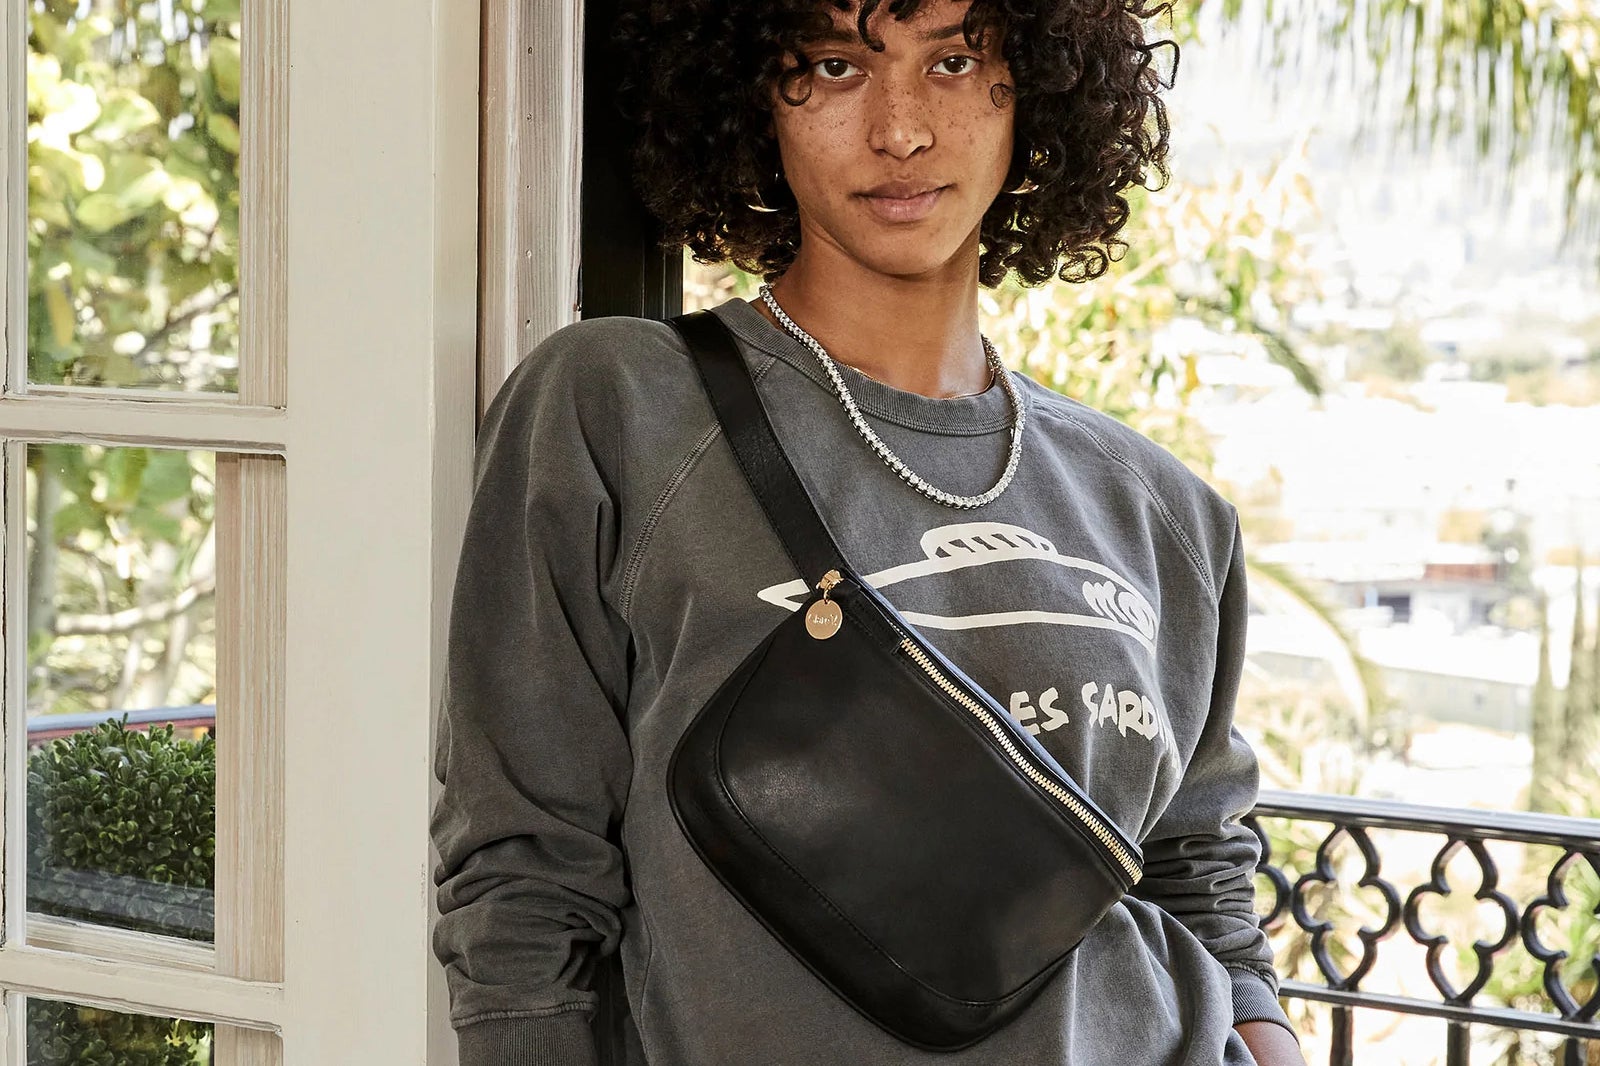 Chic Travel Fanny Pack ⋆ chic everywhere